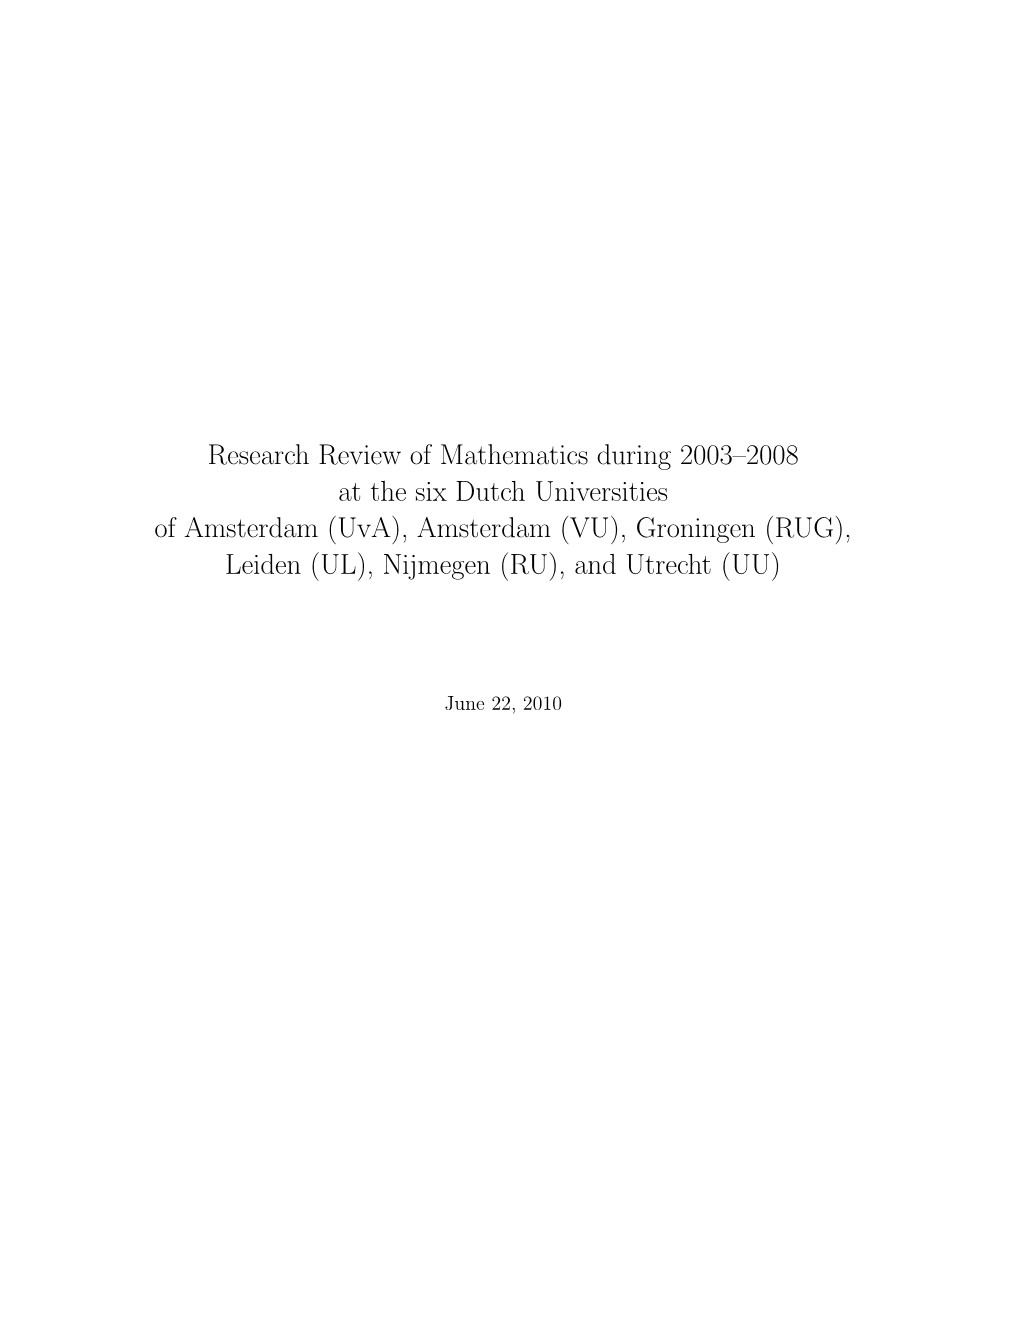 Research Review of Mathematics During 2003–2008 at the Six Dutch